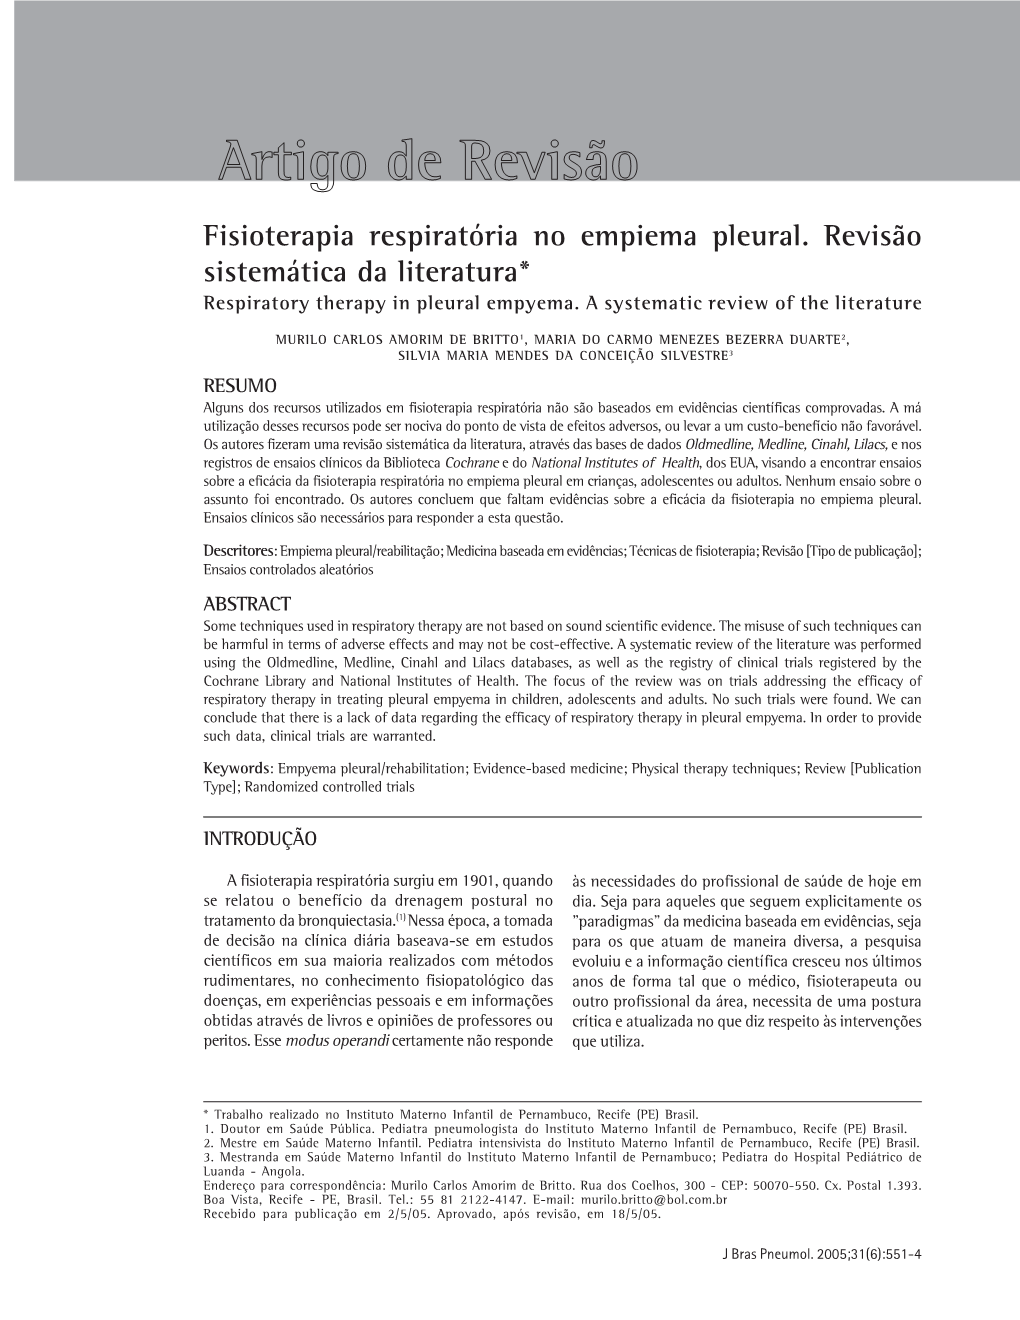 Respiratory Therapy in Pleural Empyema: a Systematic Review Of